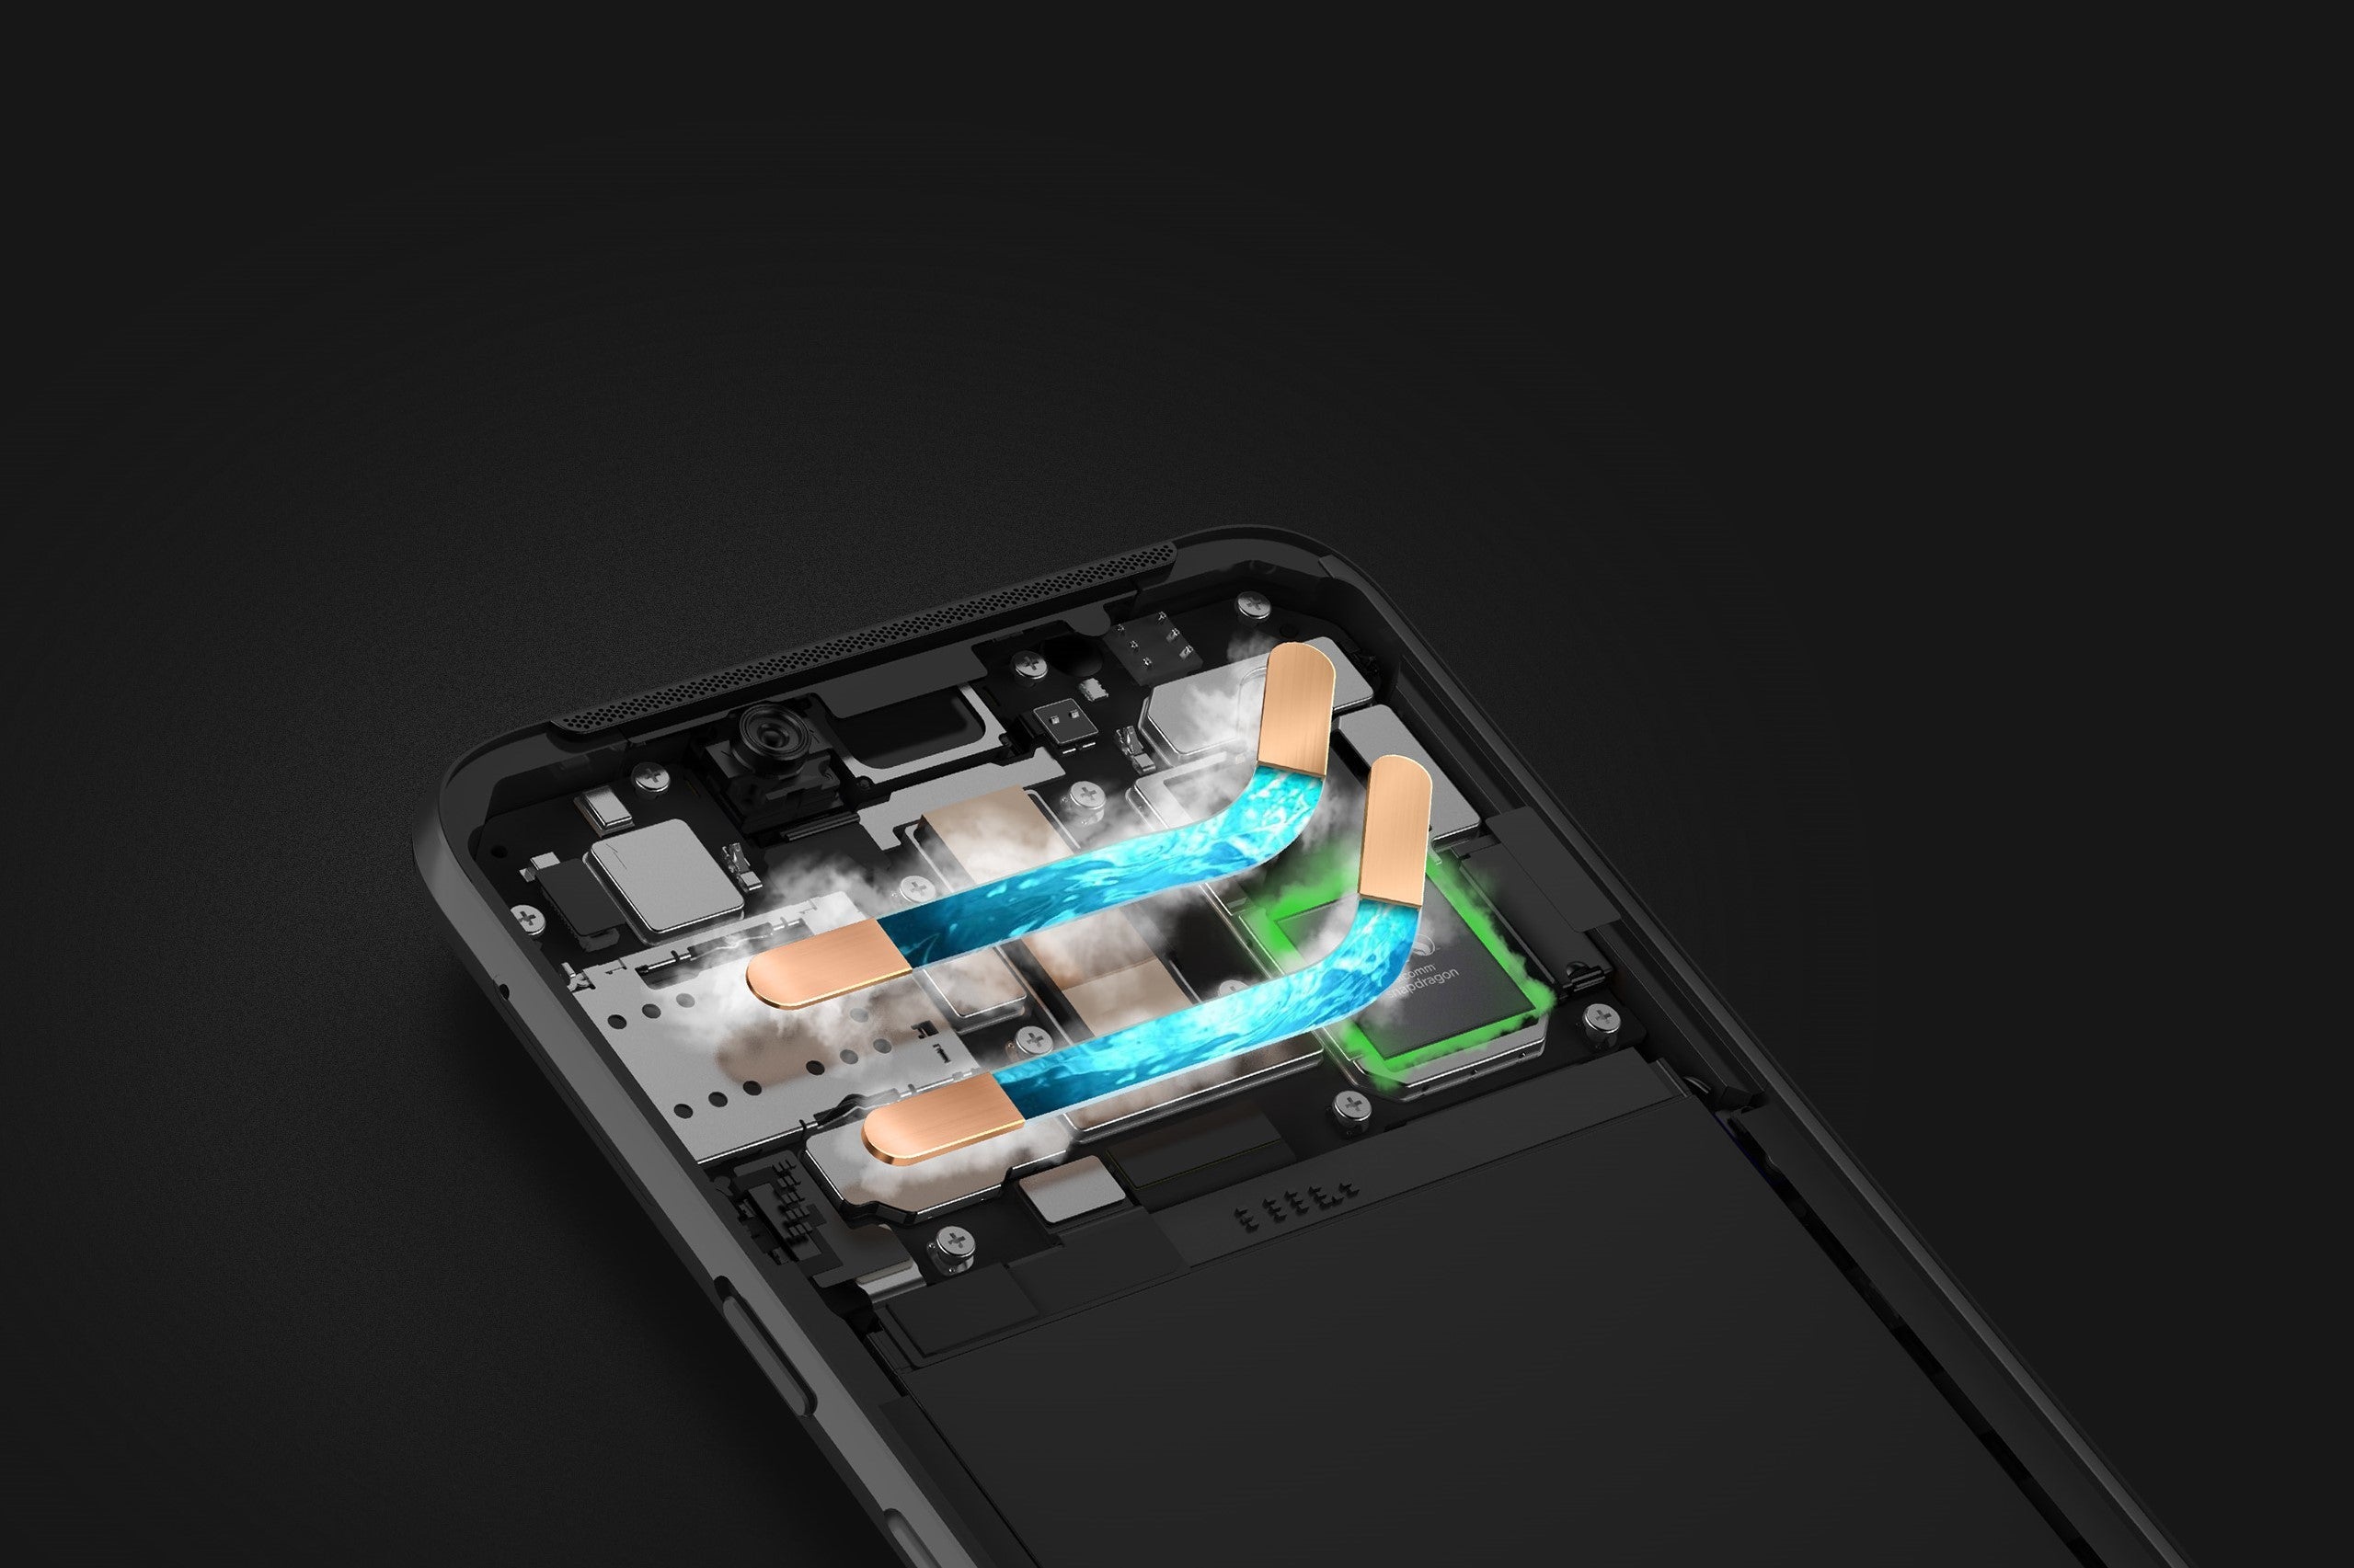 Xiaomi Black Shark Helo announced: Refined design with 10GB of RAM